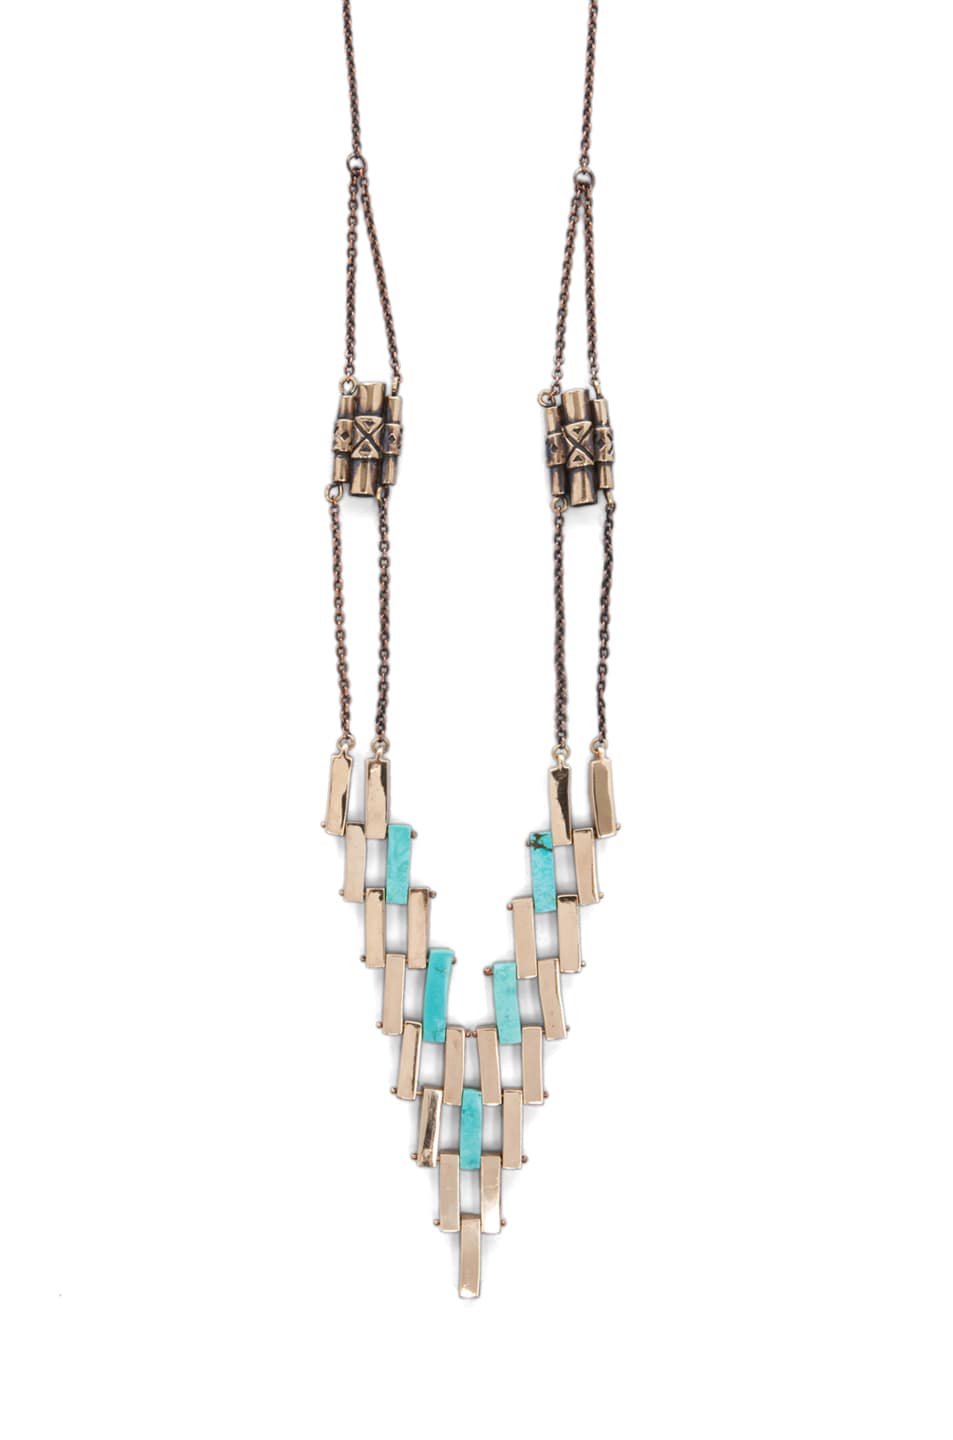 Pamela Love Empire Necklace in Turquoise | FWRD